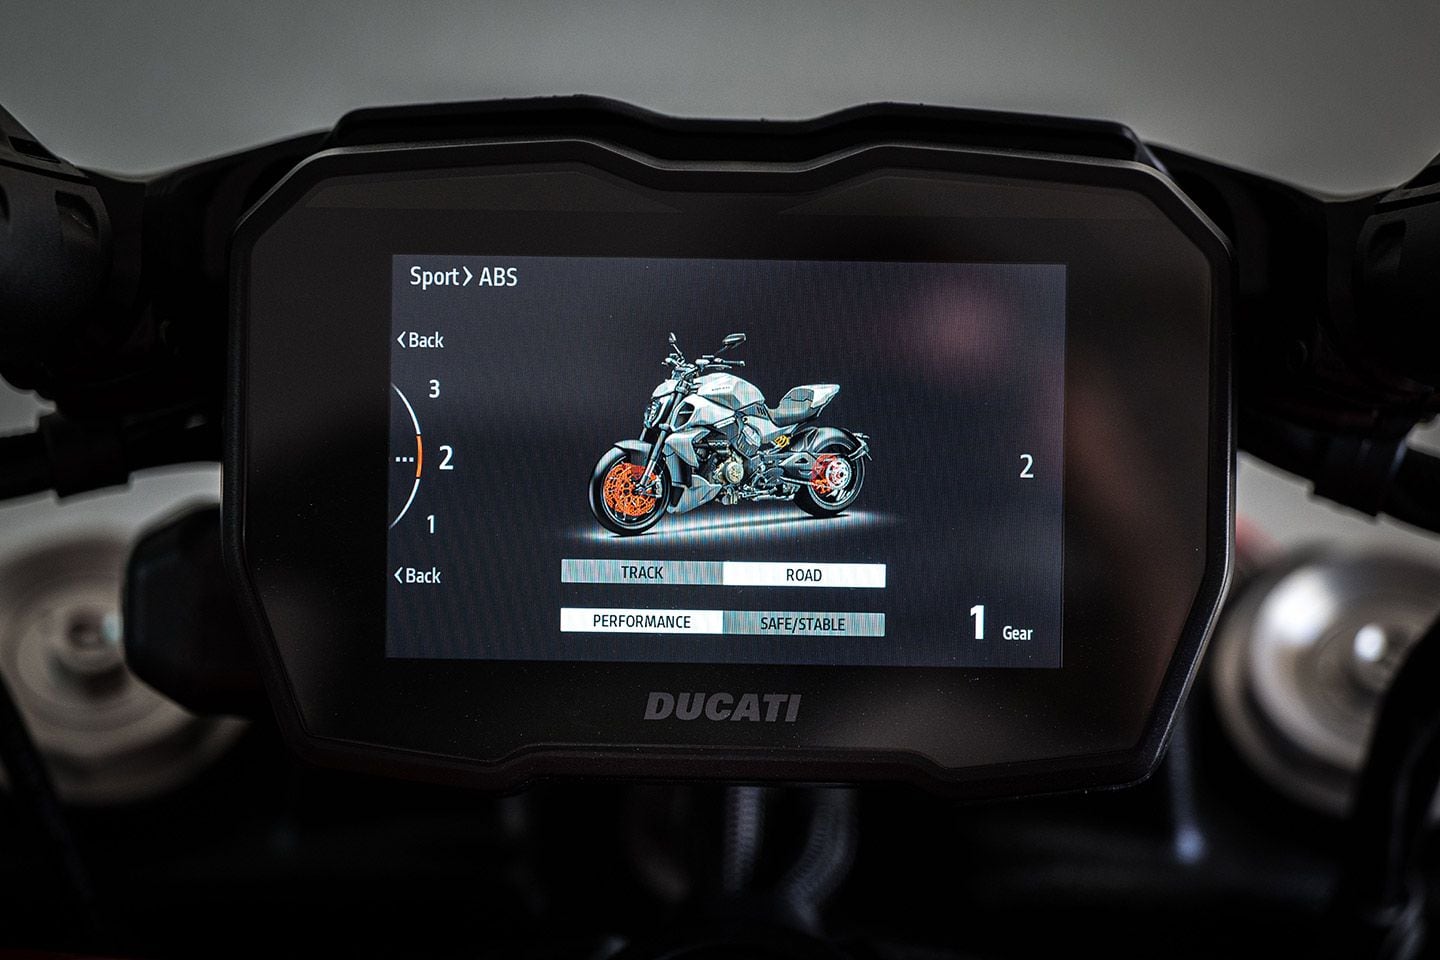 Illustrations clearly show the changes made in the settings menu on the Diavel V4.